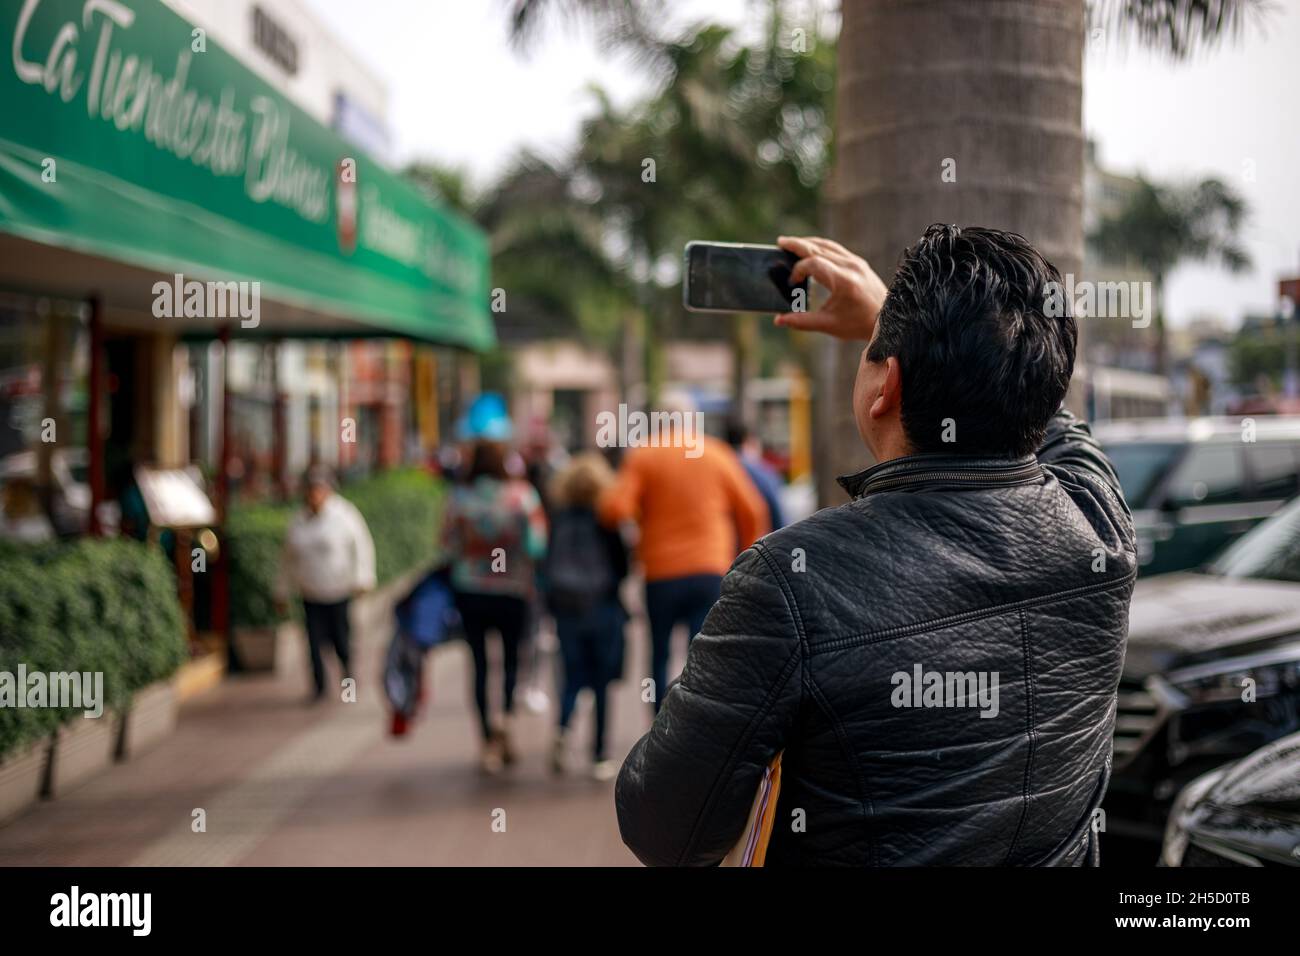 A man taking a picture with his phone on a street in Lima, Peru during daytime. Stock Photo